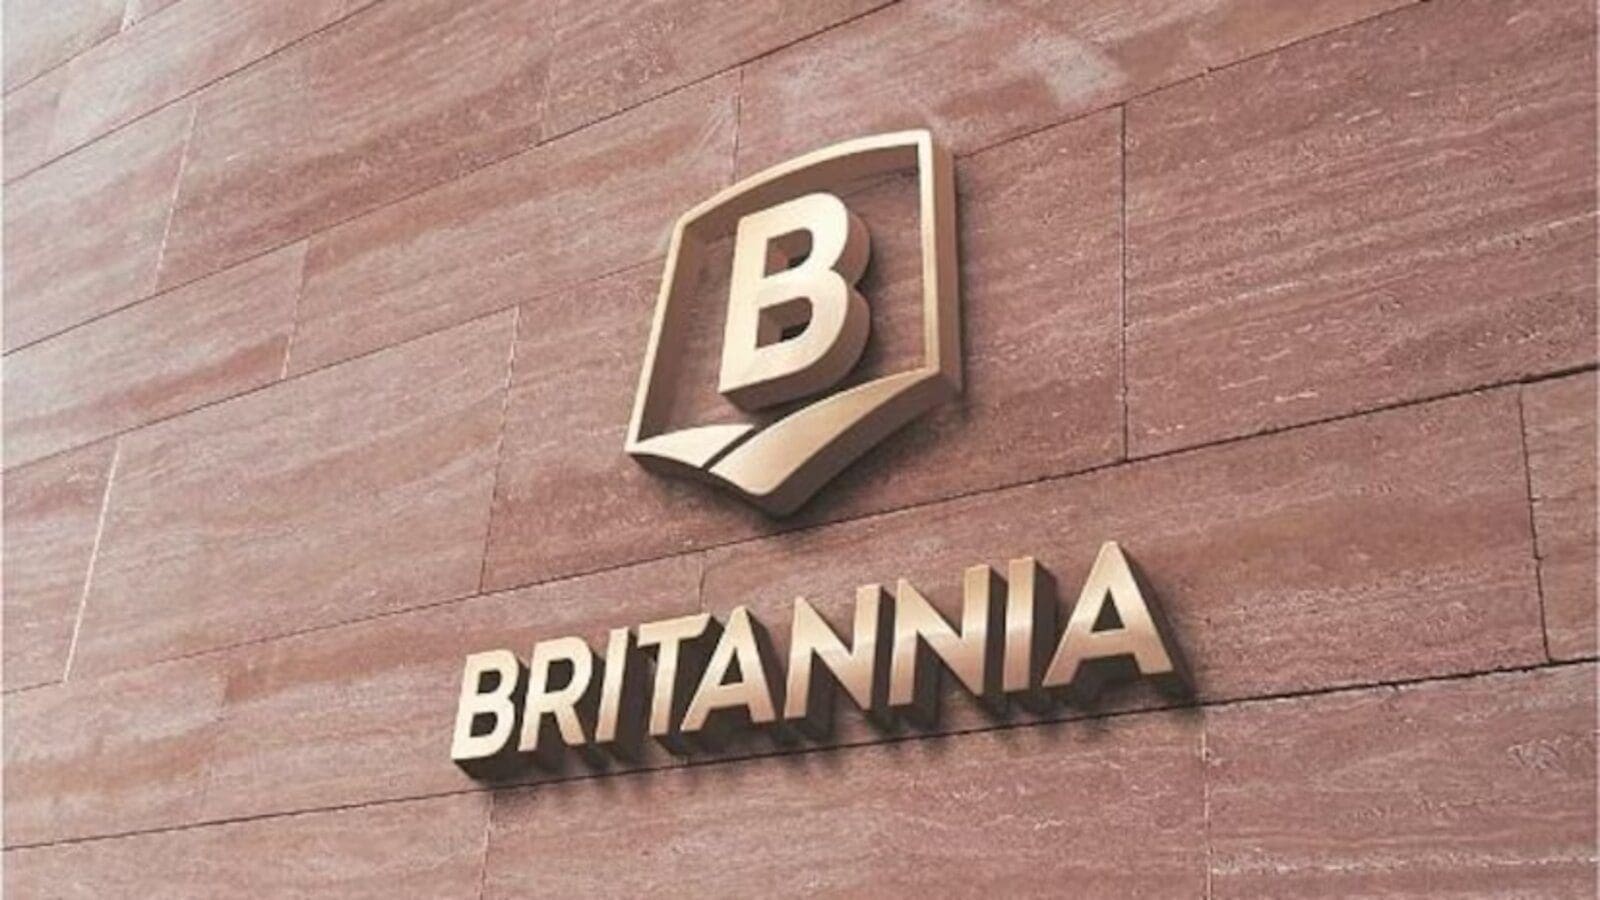 Britannia forecasts around 3% input cost inflation for FY24 on the back of easing commodity costs